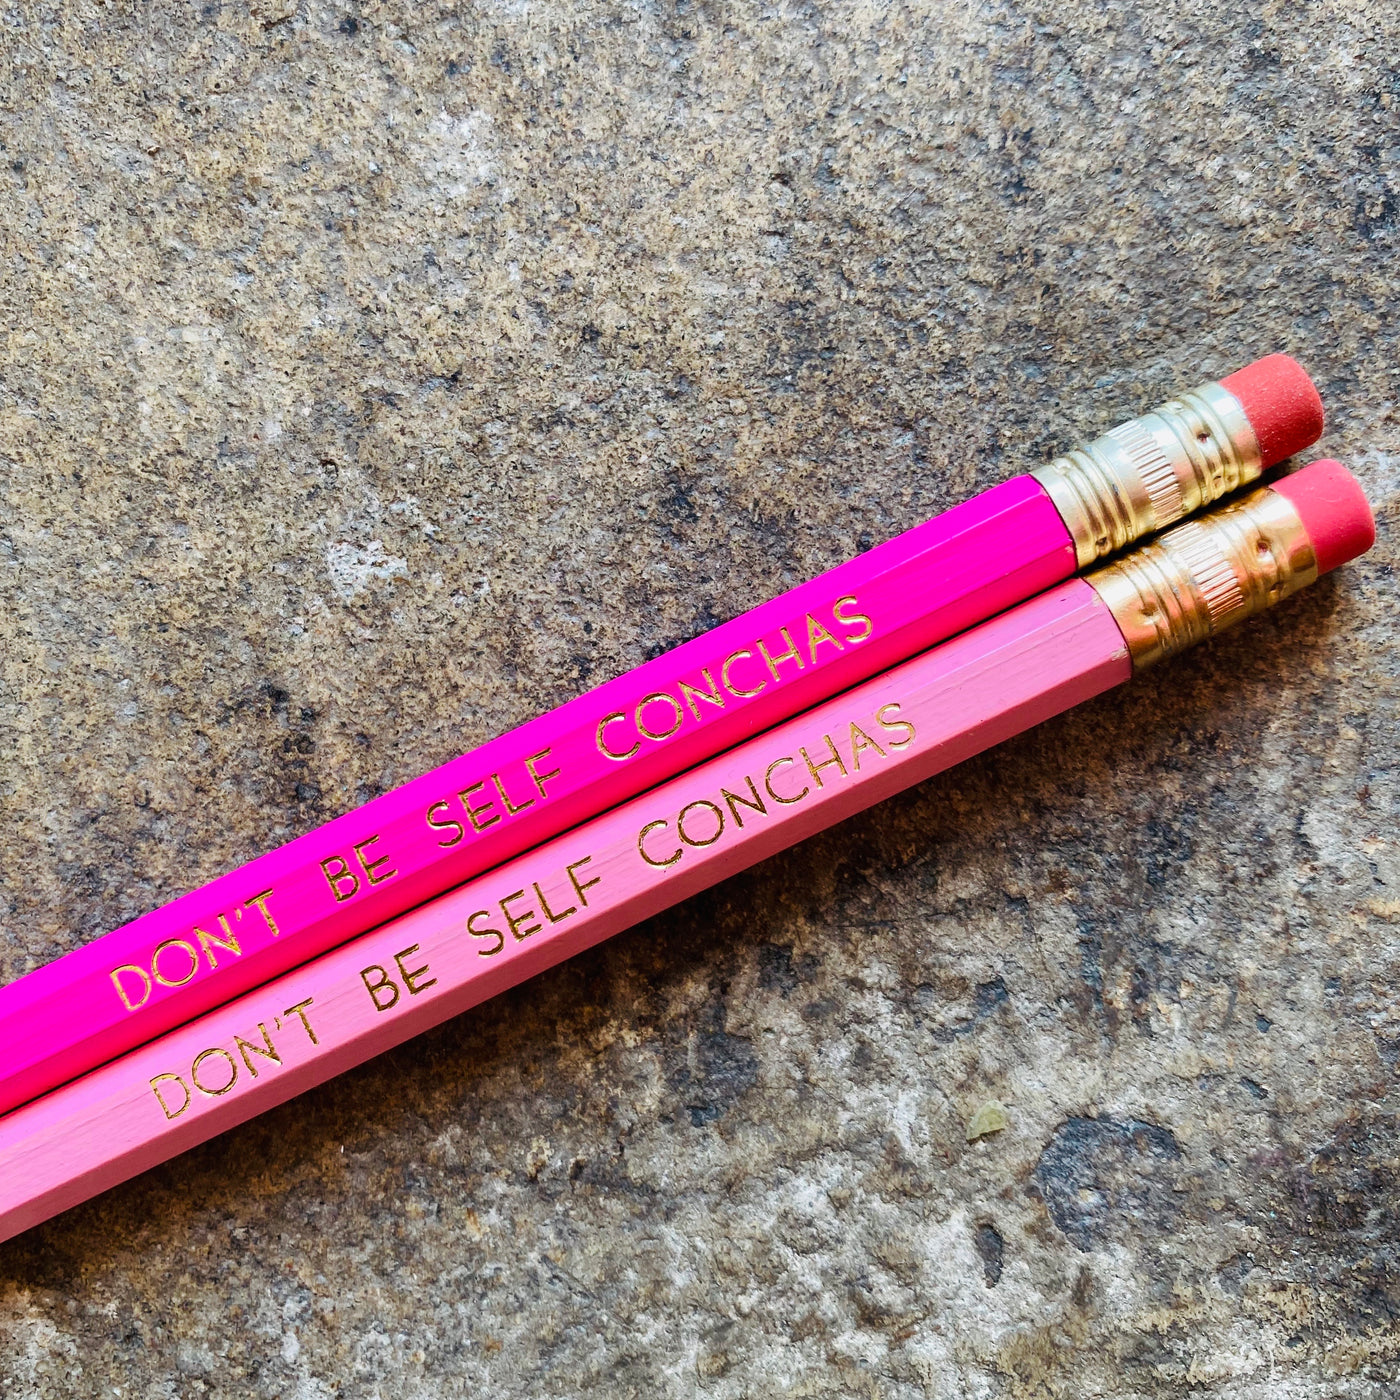 Don't Be Self Conchas phrase pencils in bright pink and light pink.